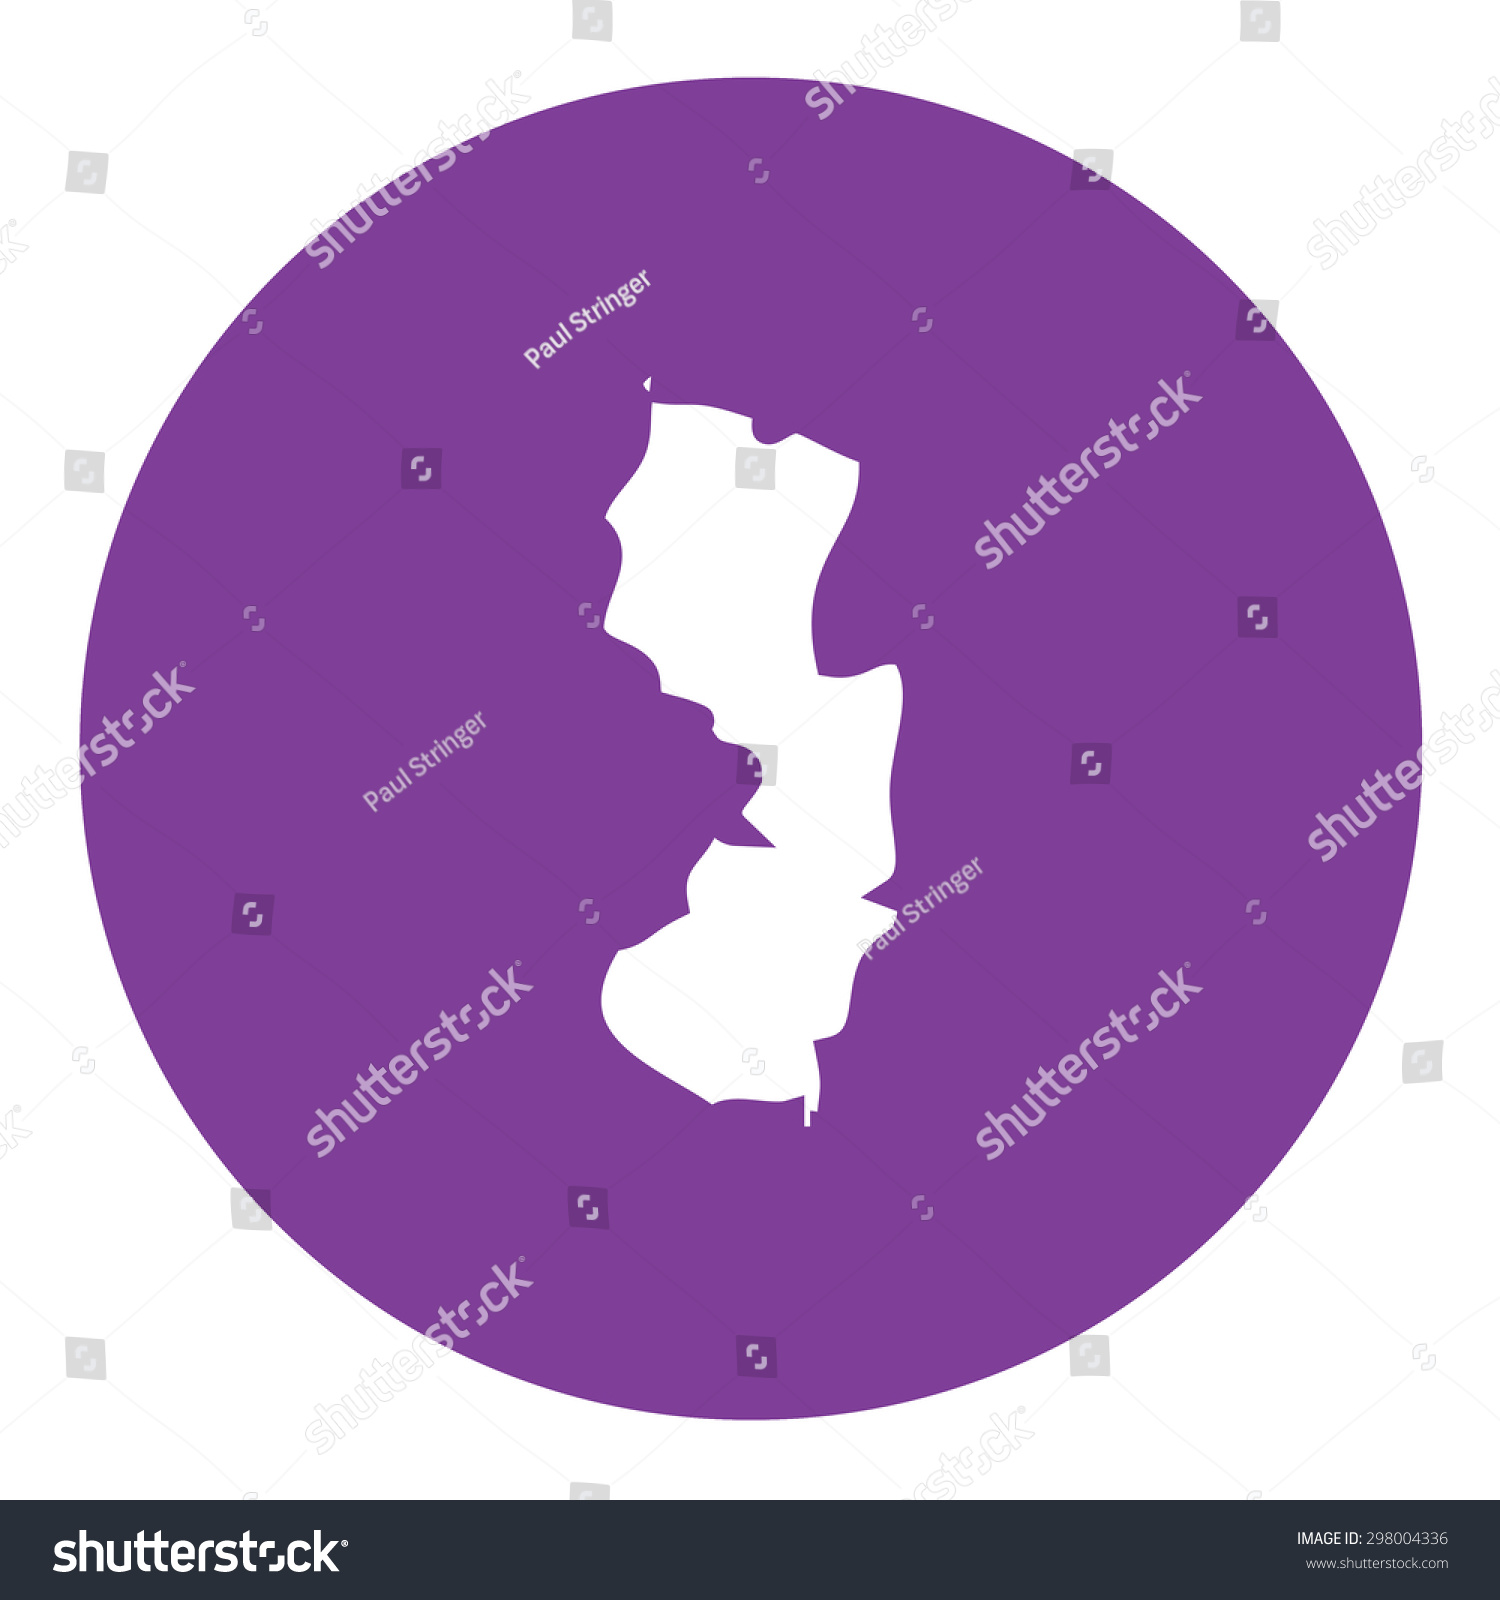 Highly detailed map inside a circle of the state of New Jersey #298004336